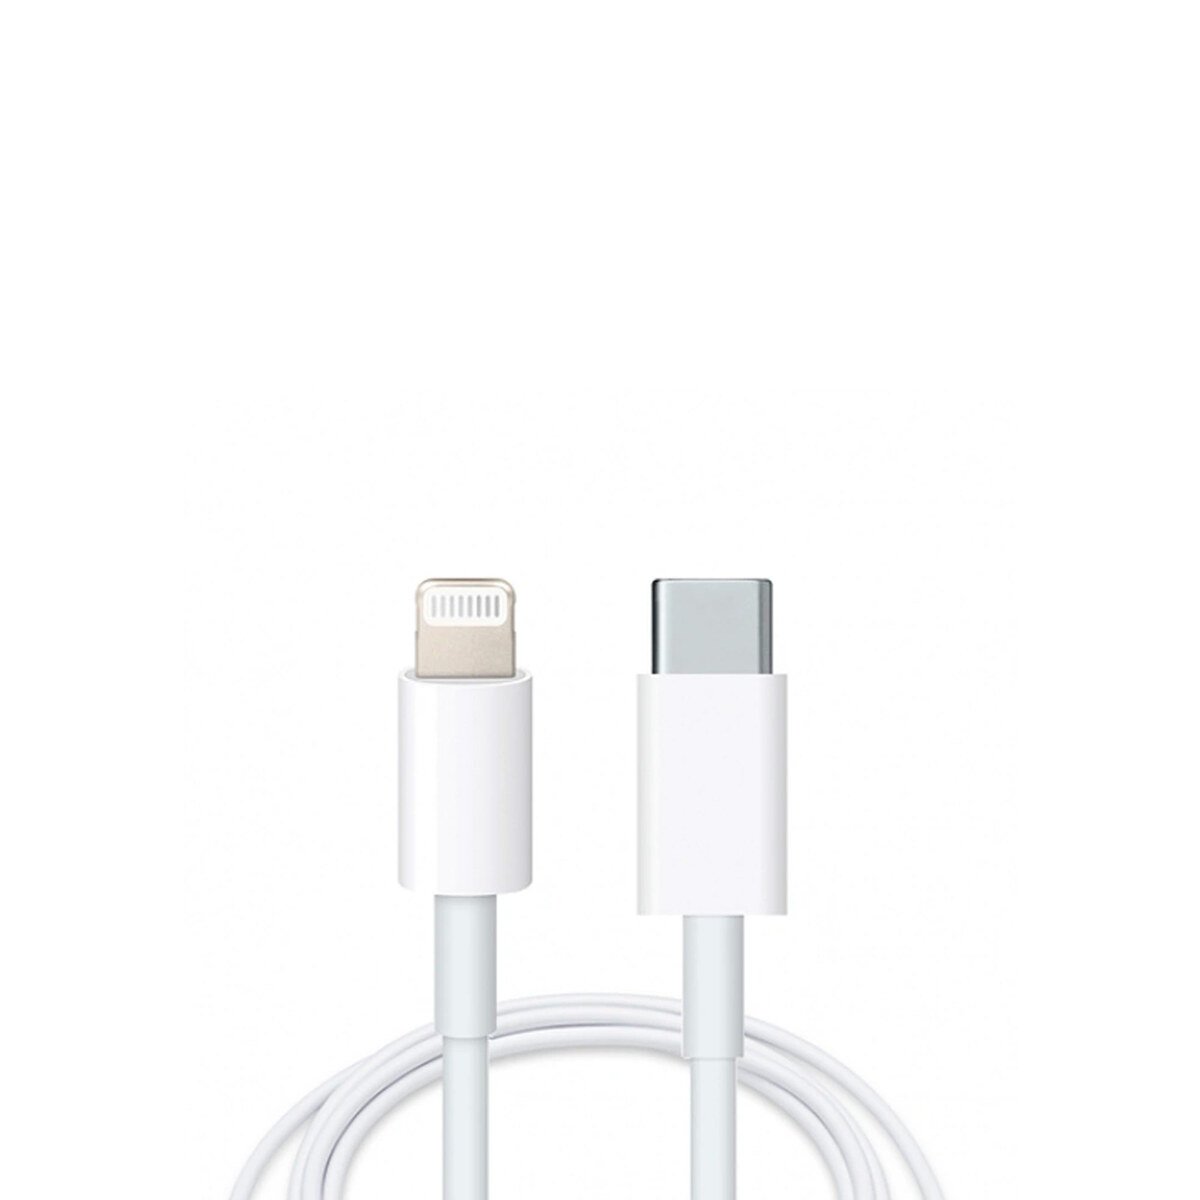 Apple USB-C to Lightning Cable MQGJ2ZM/A 1Mtr